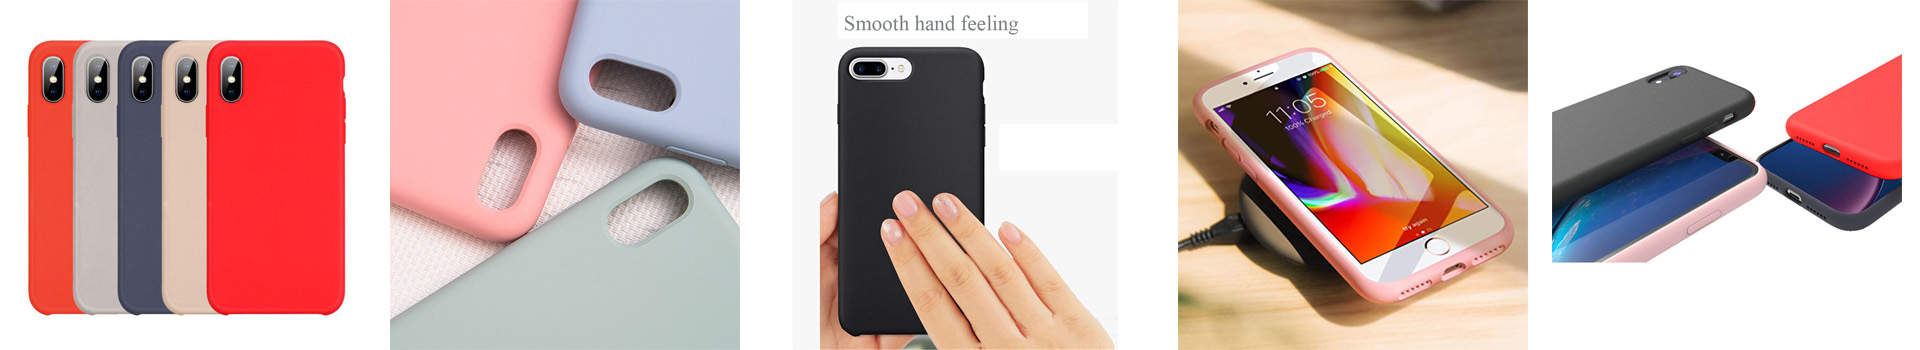 2019 New Soft Microfiber Liquid Silicone Case for Iphone Xi,For Iphone 11